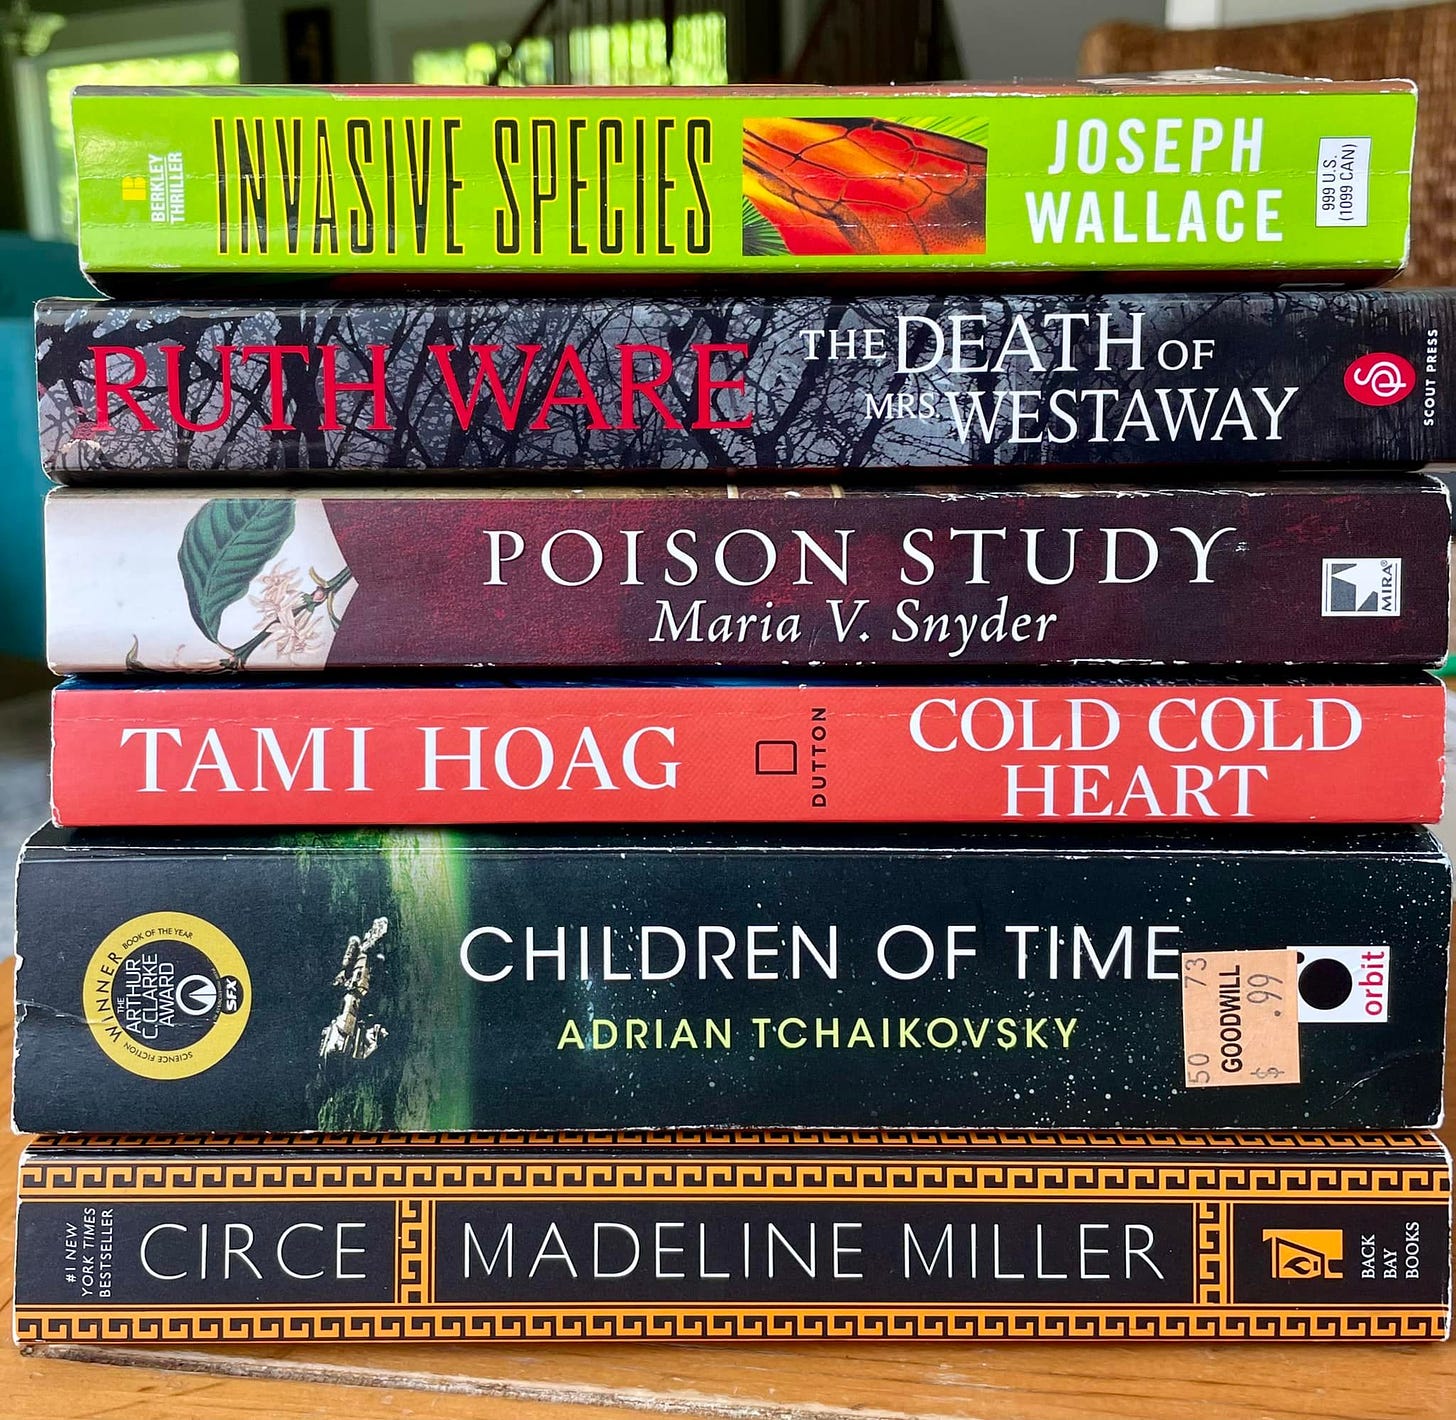 image of book spines; titles are invasive species, death of mrs westaway, poison study, cold cold heart, children of time, circe